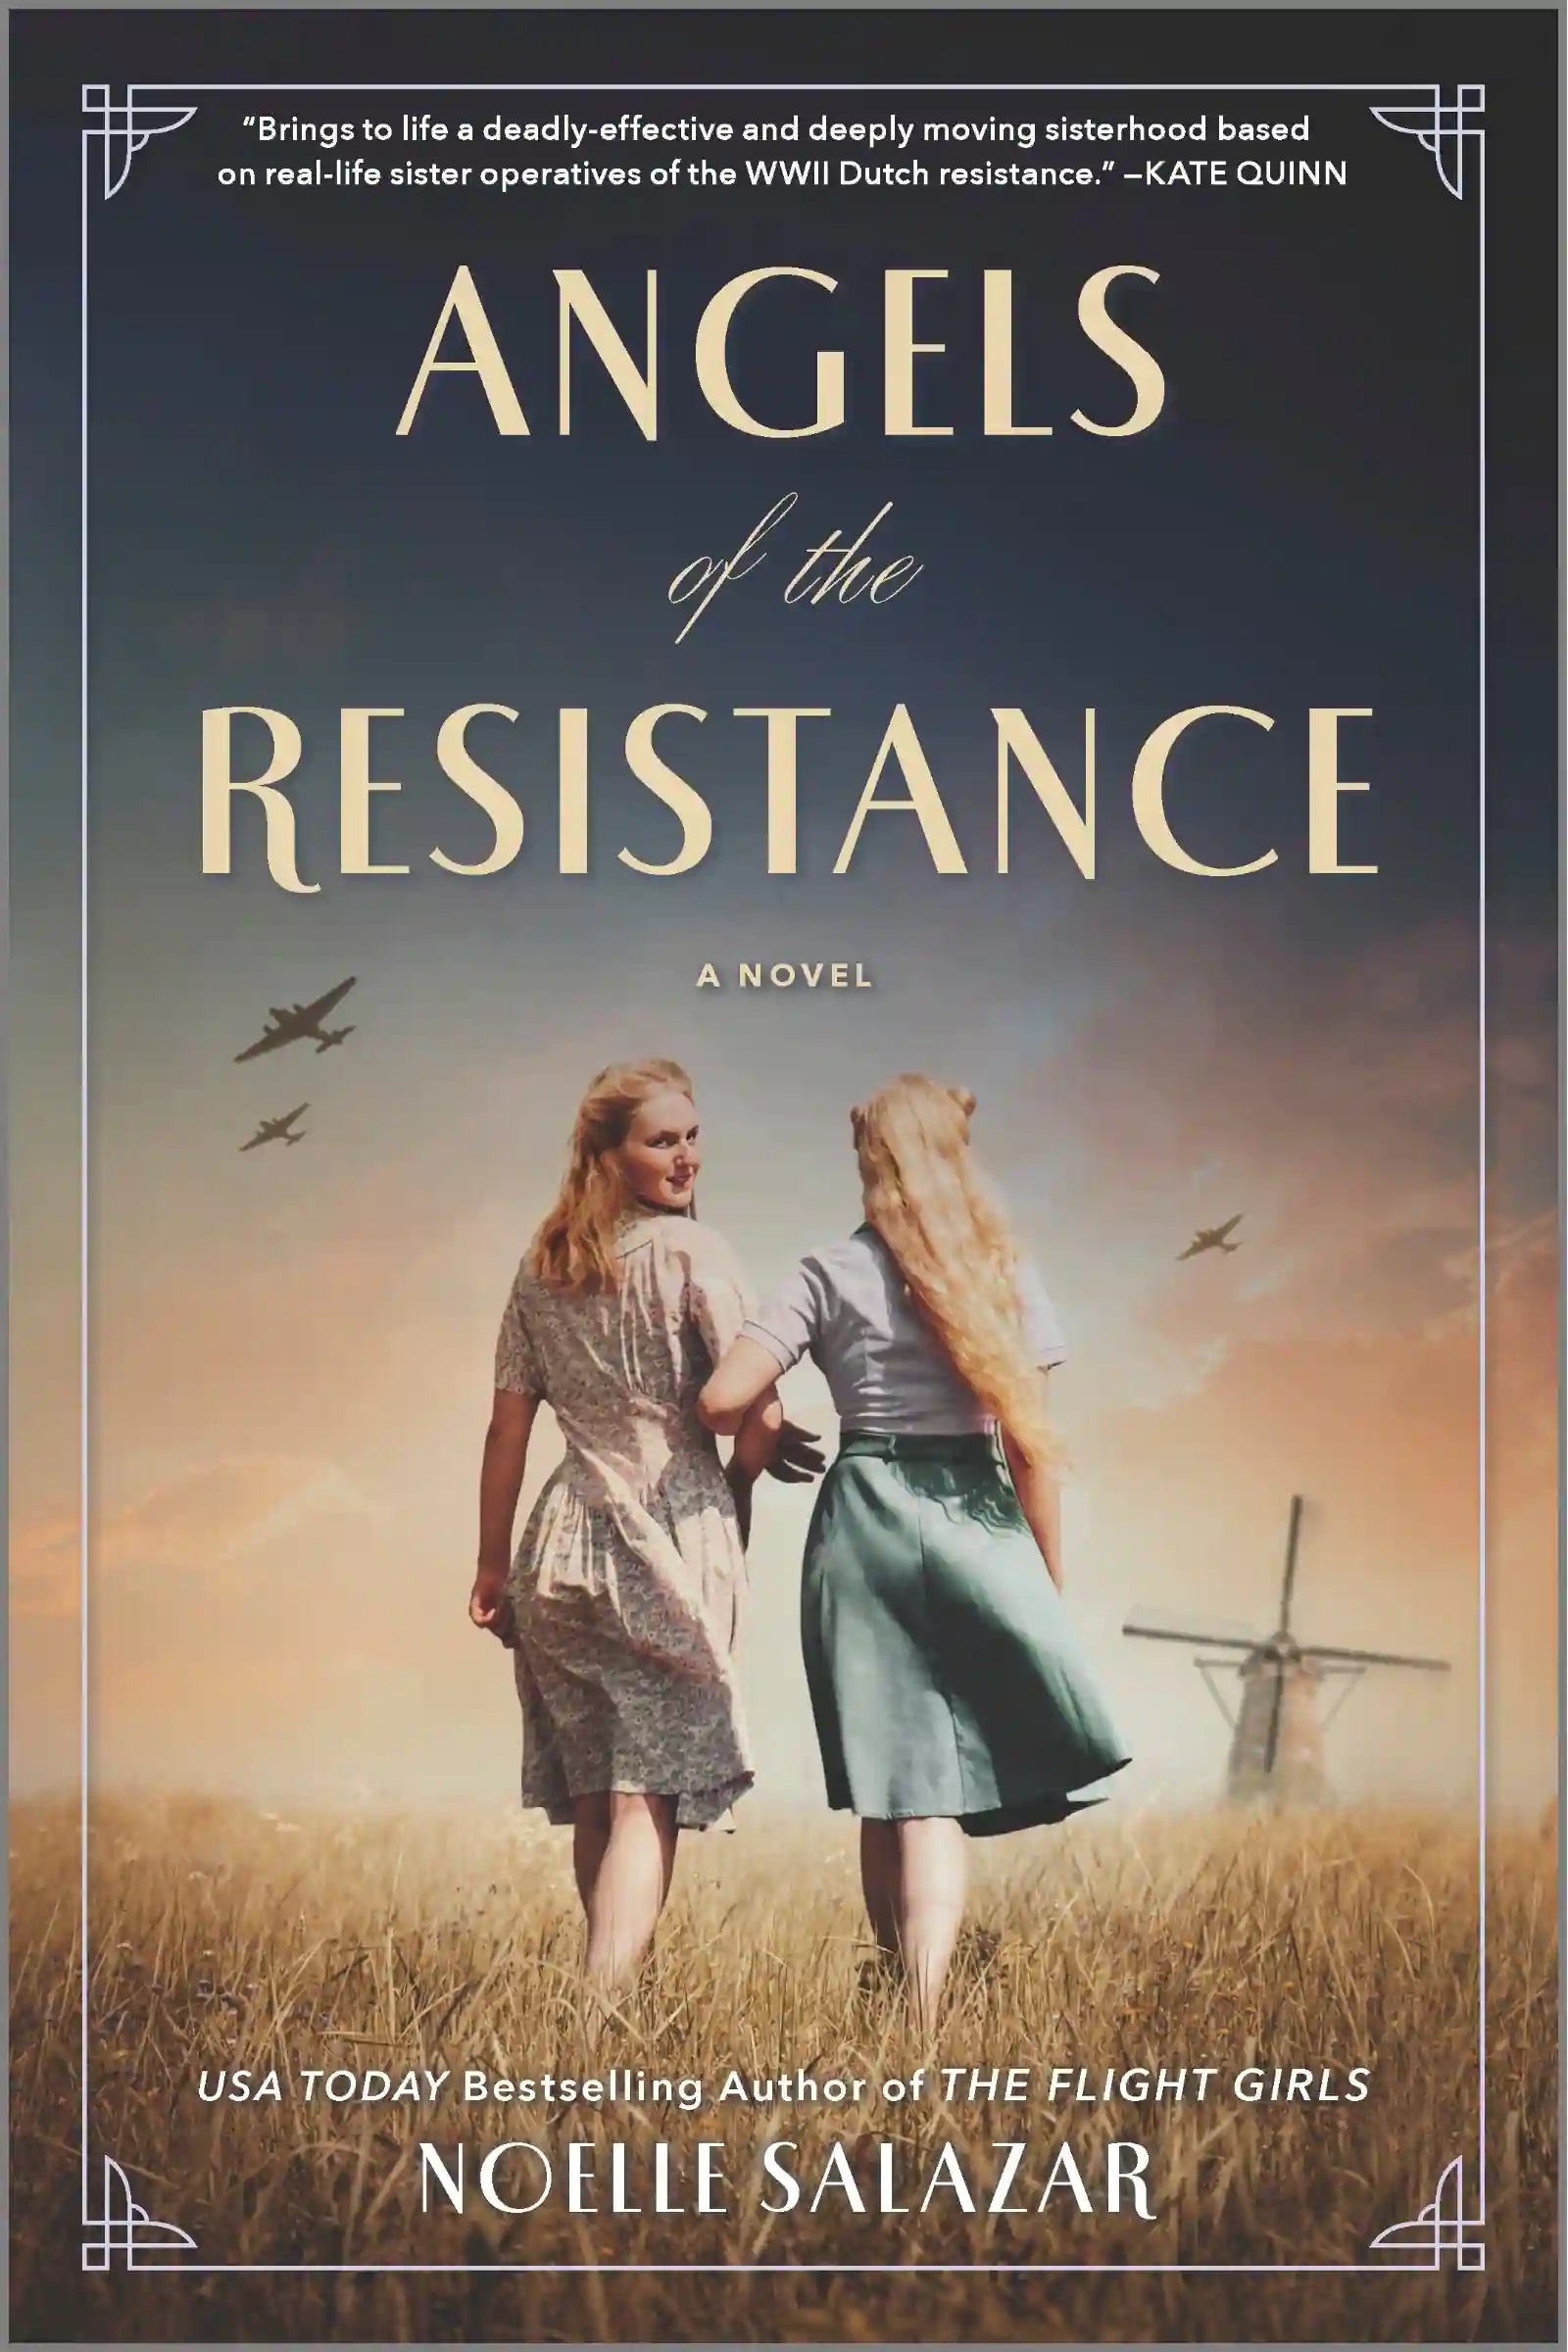 Angels of the Resistance - SavvyMom